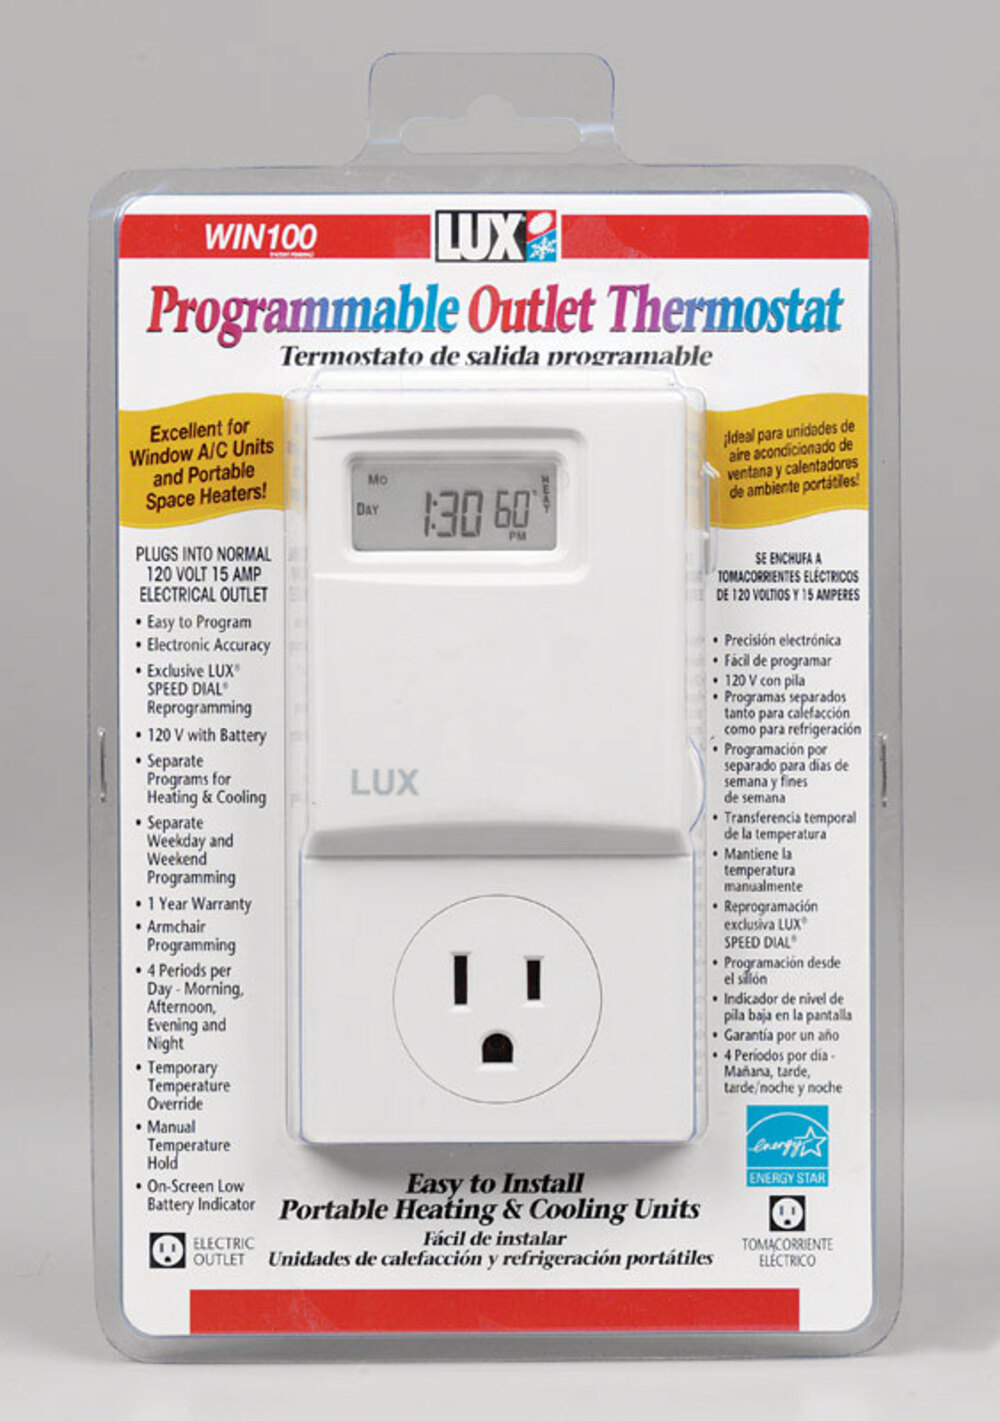 Lux WIN100-A05 Programmable Outlet Thermostat - image 3 of 3